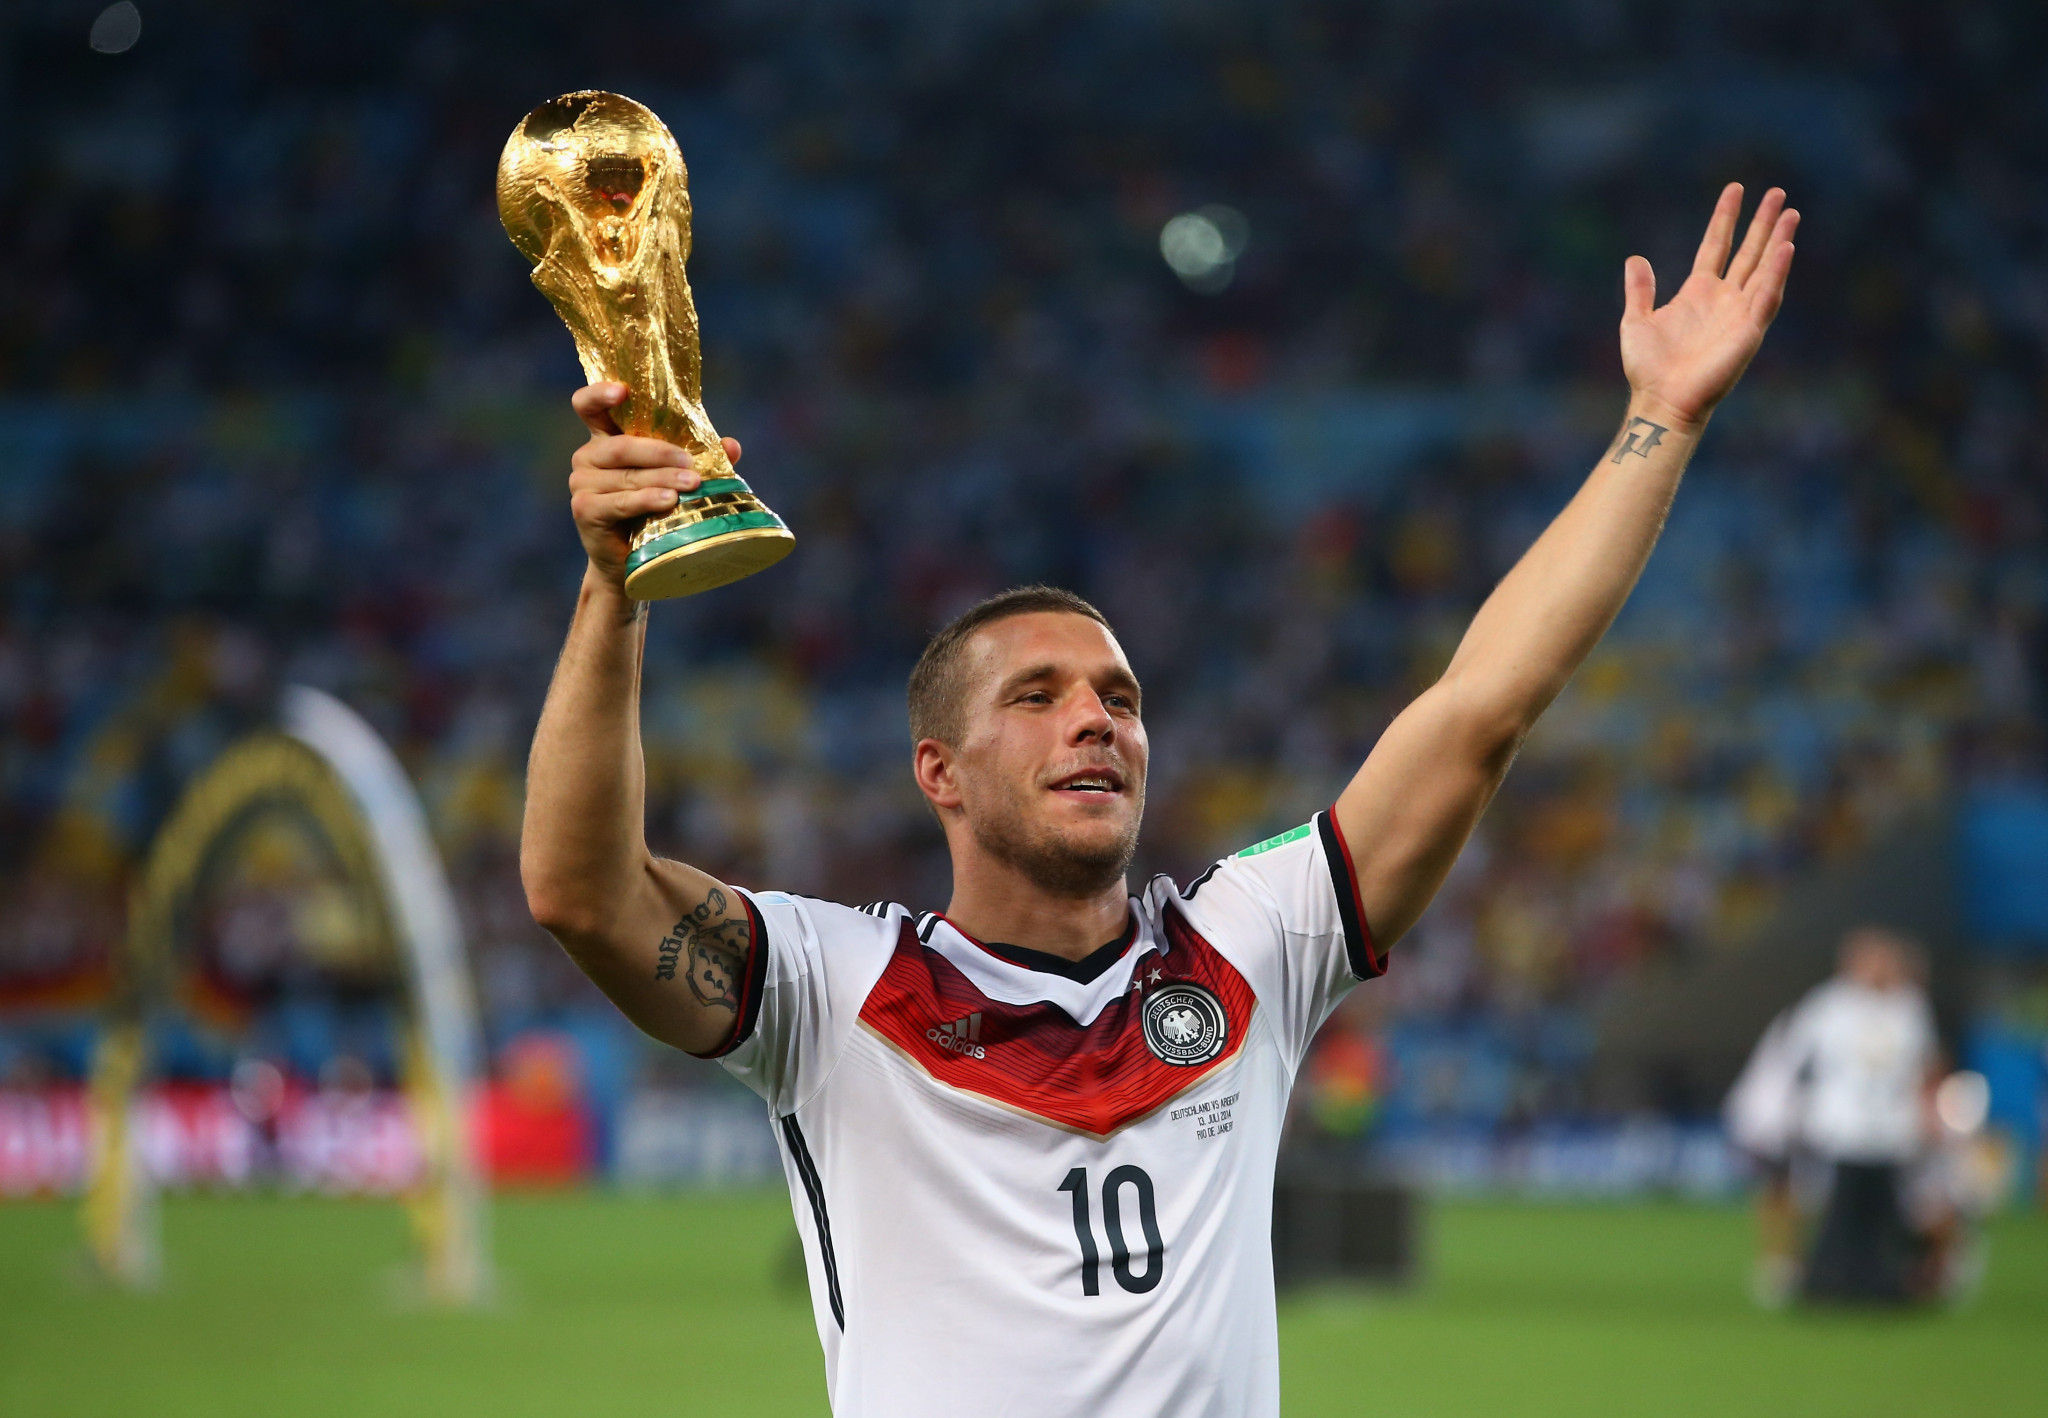 Lukas Podolski won the FIFA World Cup for Germany in 2014, and has also attended the Teqball World Championships in Gliwice ©Getty Images